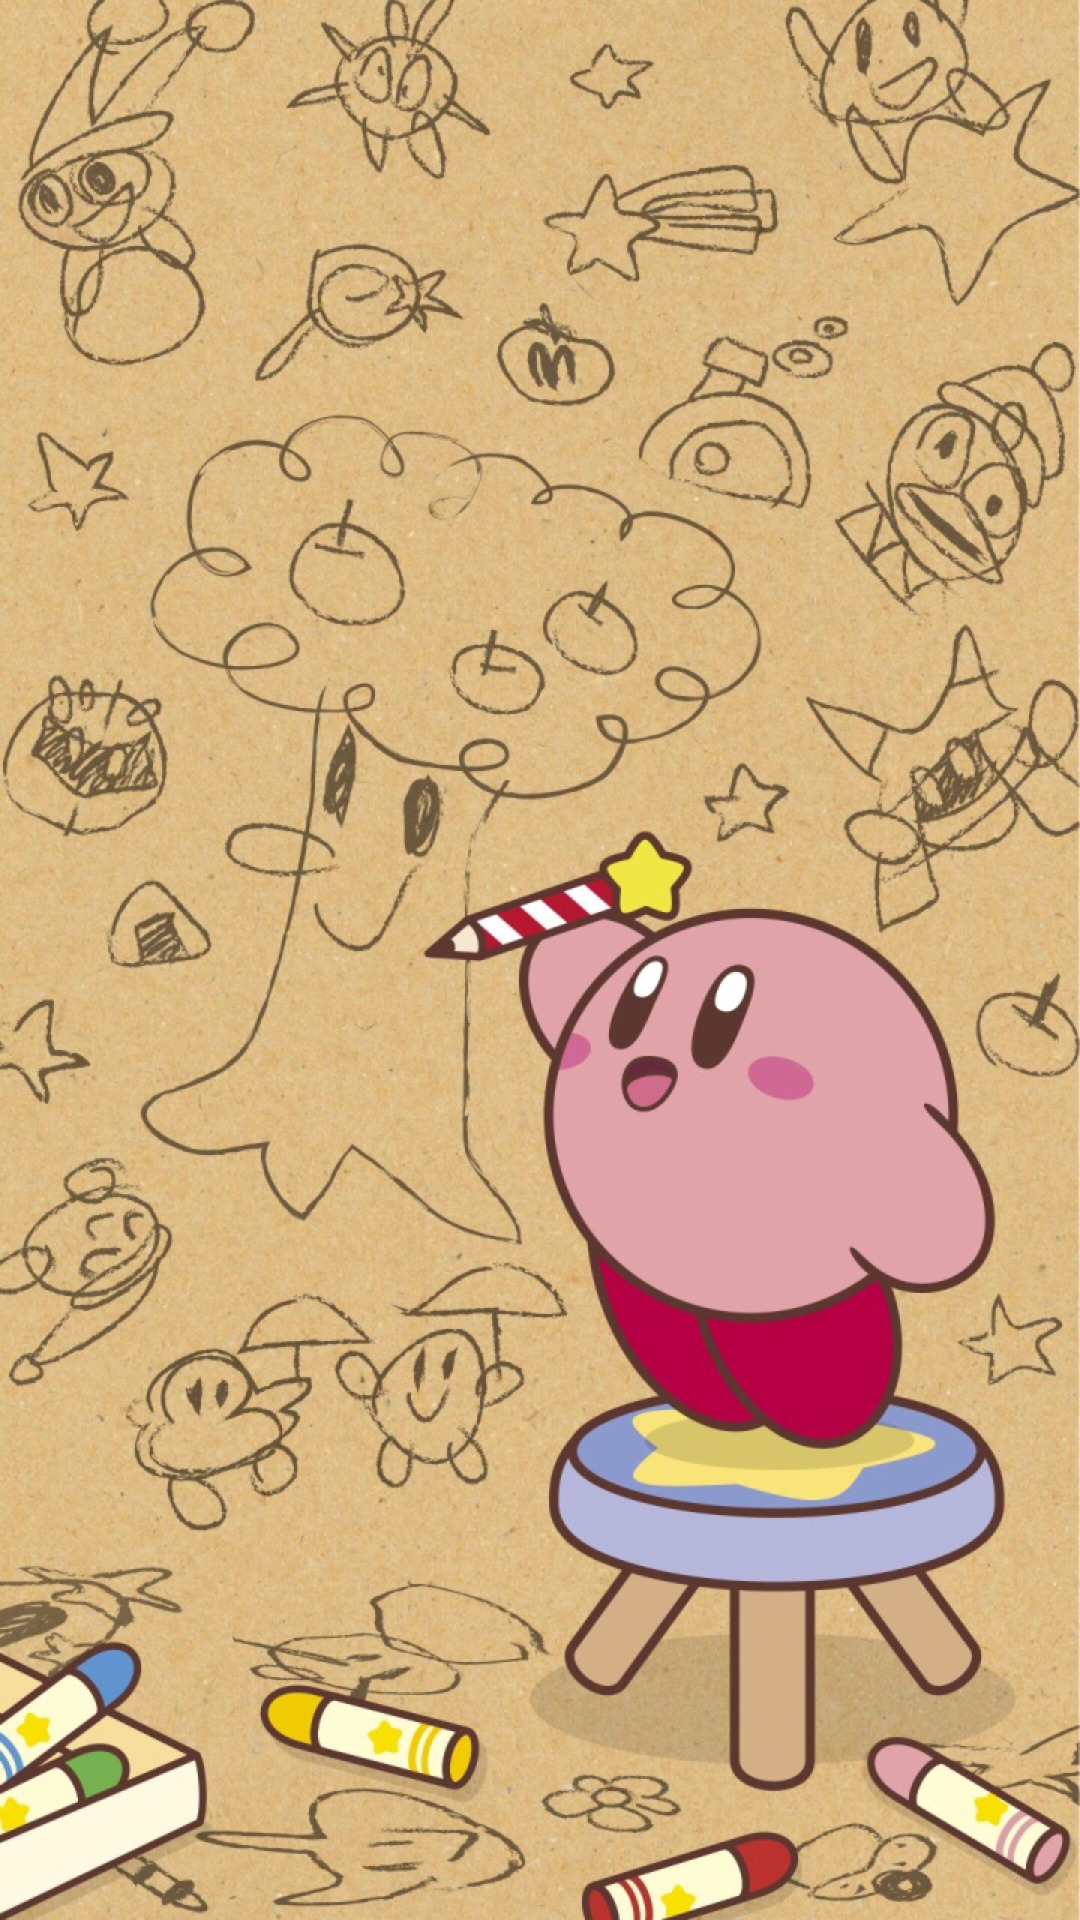 Download Latest Free Desktop HD Wallpapers of  Games Kirby